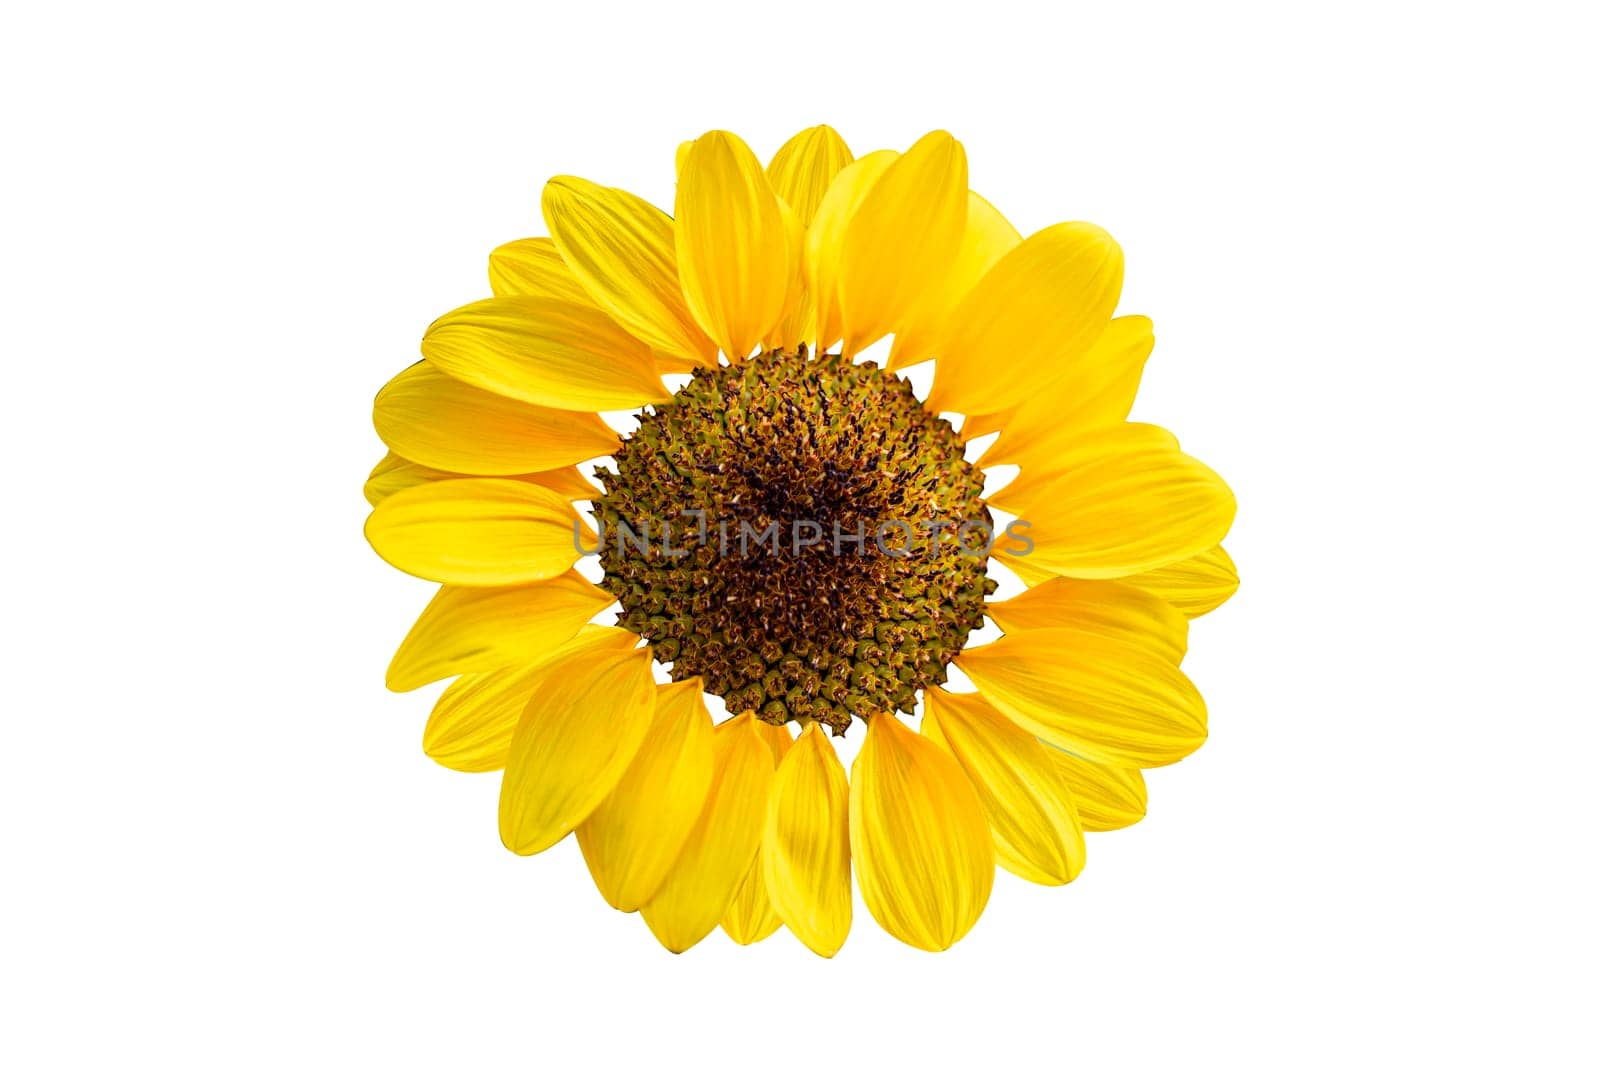 Sunflower isolated on white background with clipping path. by pamai